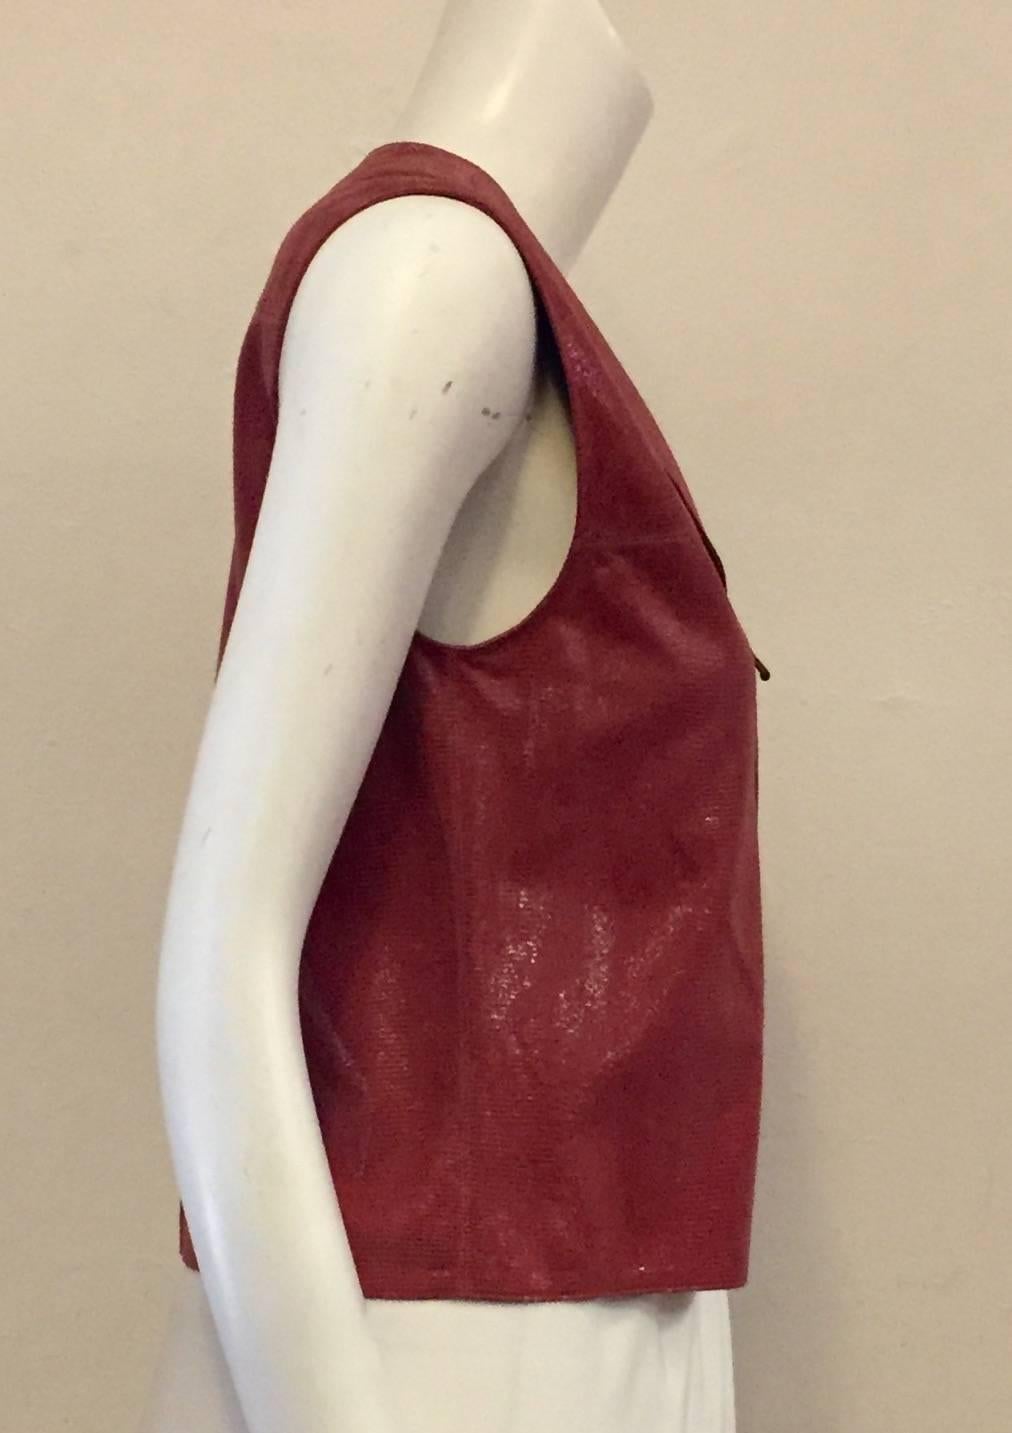 Classic Chanel meets current style, in this up to date vest in  striking Salmon colored goat skin.  Notch collar sleeveless vest can be worn by itself or with a blouse underneath accentuating its uniqueness.  Authentic Chanel, with charm and pizzazz